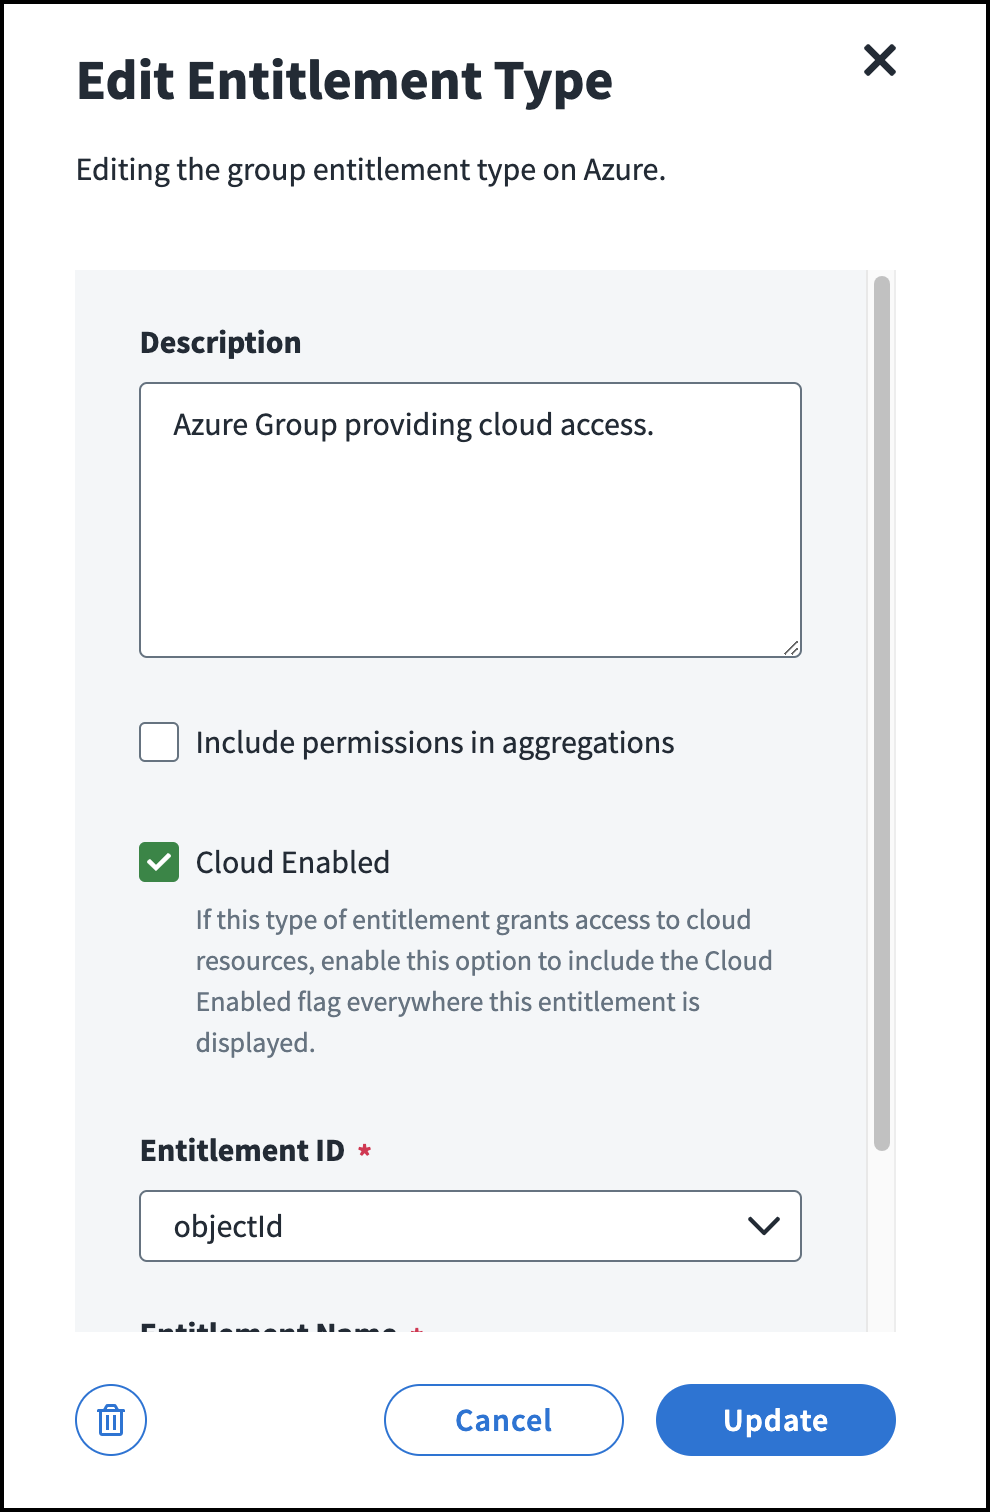 The edit entitlement type window with the Cloud Enabled checkbox selected.